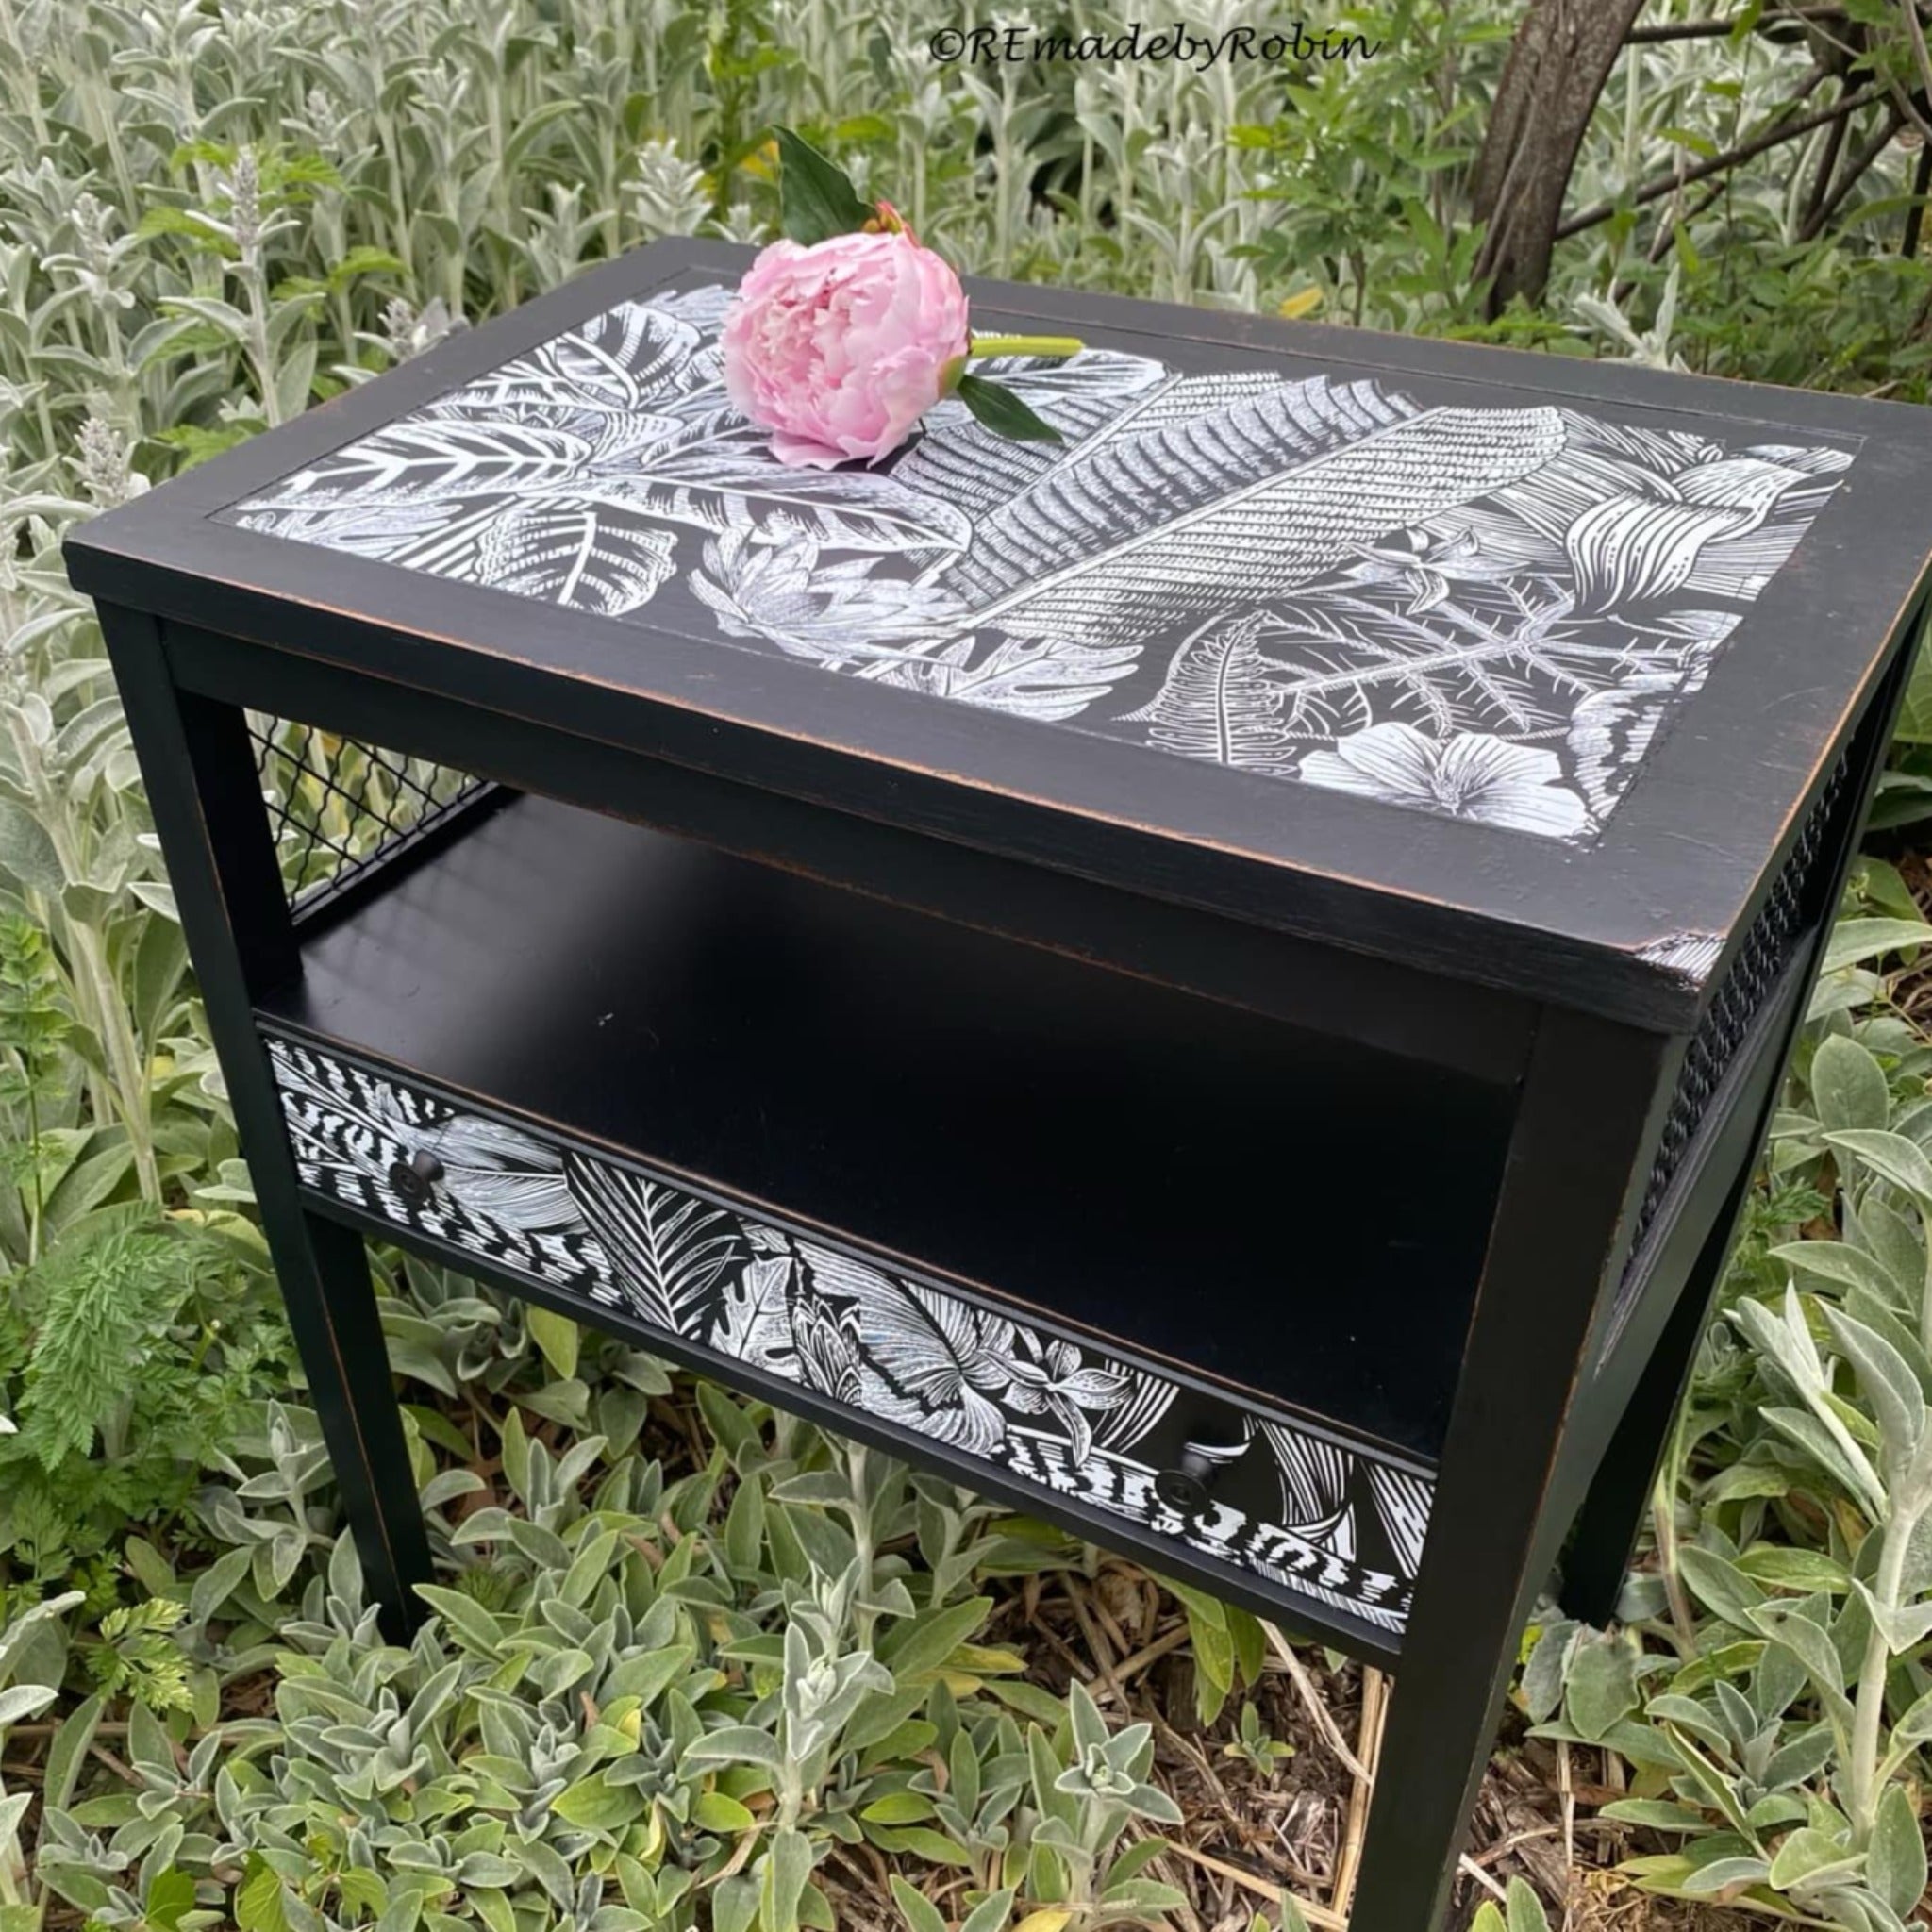 A vintage nightstand refurbished by ReMade by Robin is painted black and features ReDesign with Prima's Abstract Jungle on the top and fron small drawer beneath an open shelf.